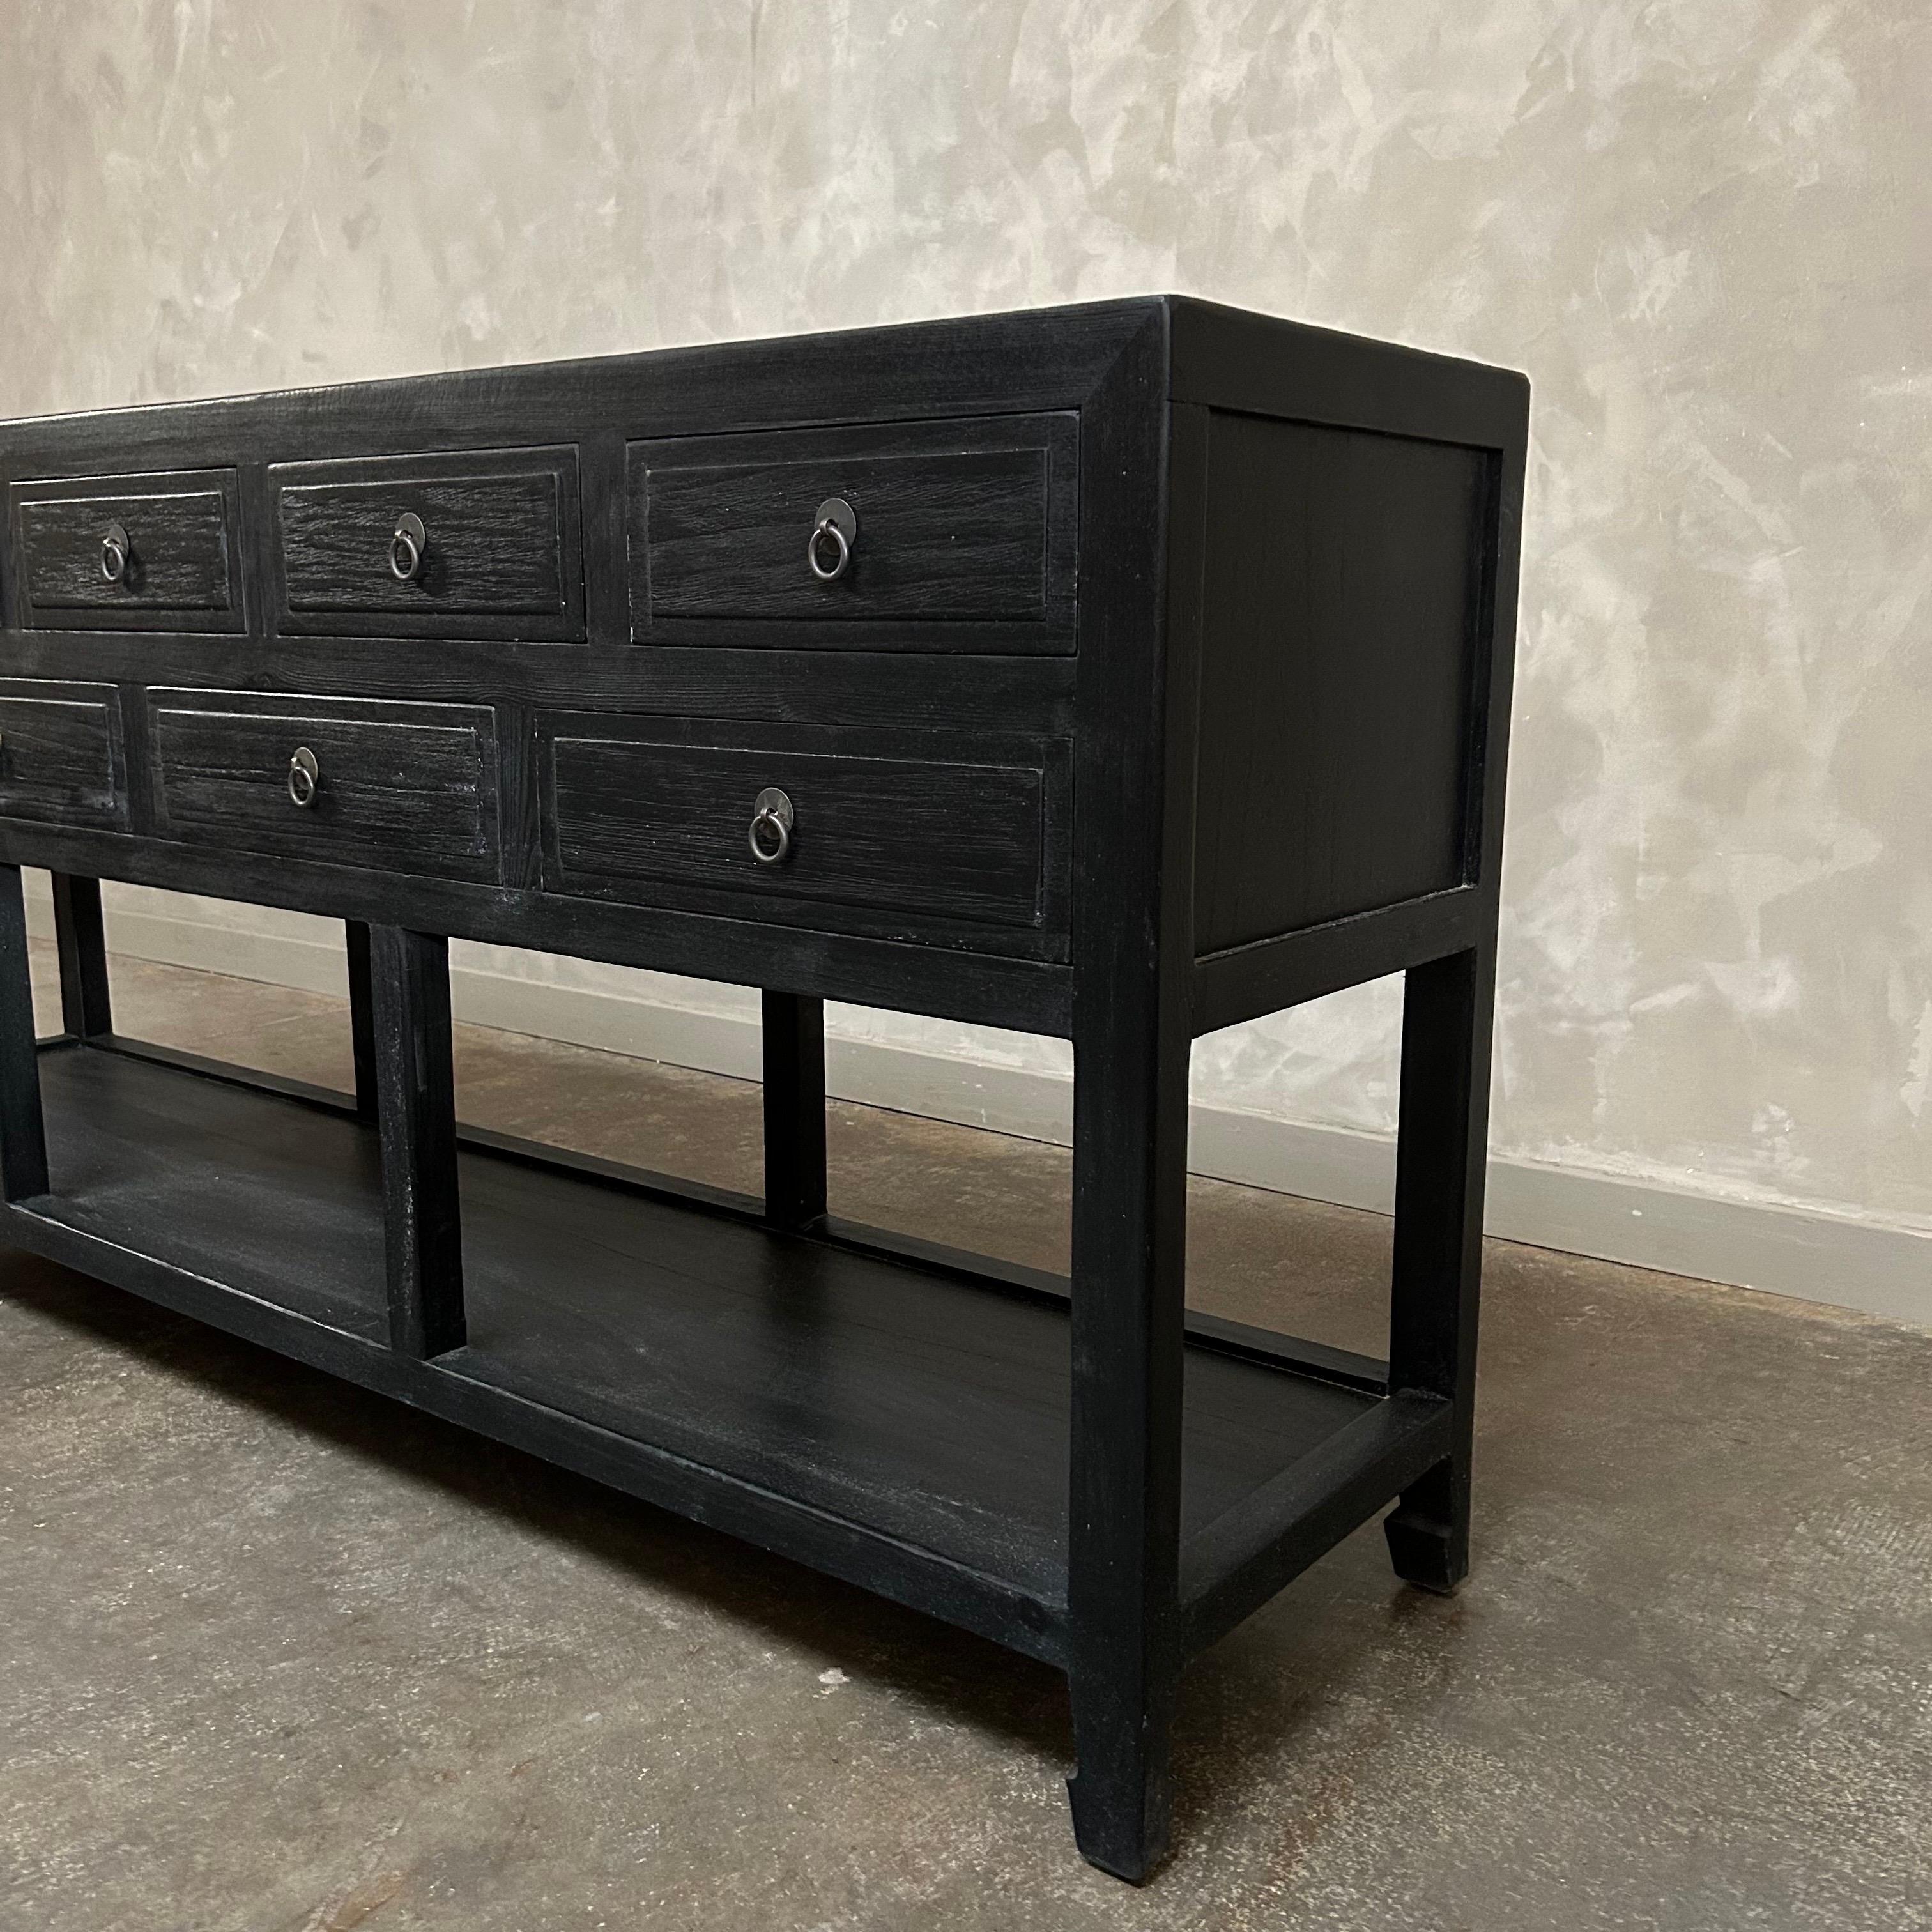 Contemporary Custom Made Reclaimed Wood Console with Drawers in Black Painted Finish For Sale